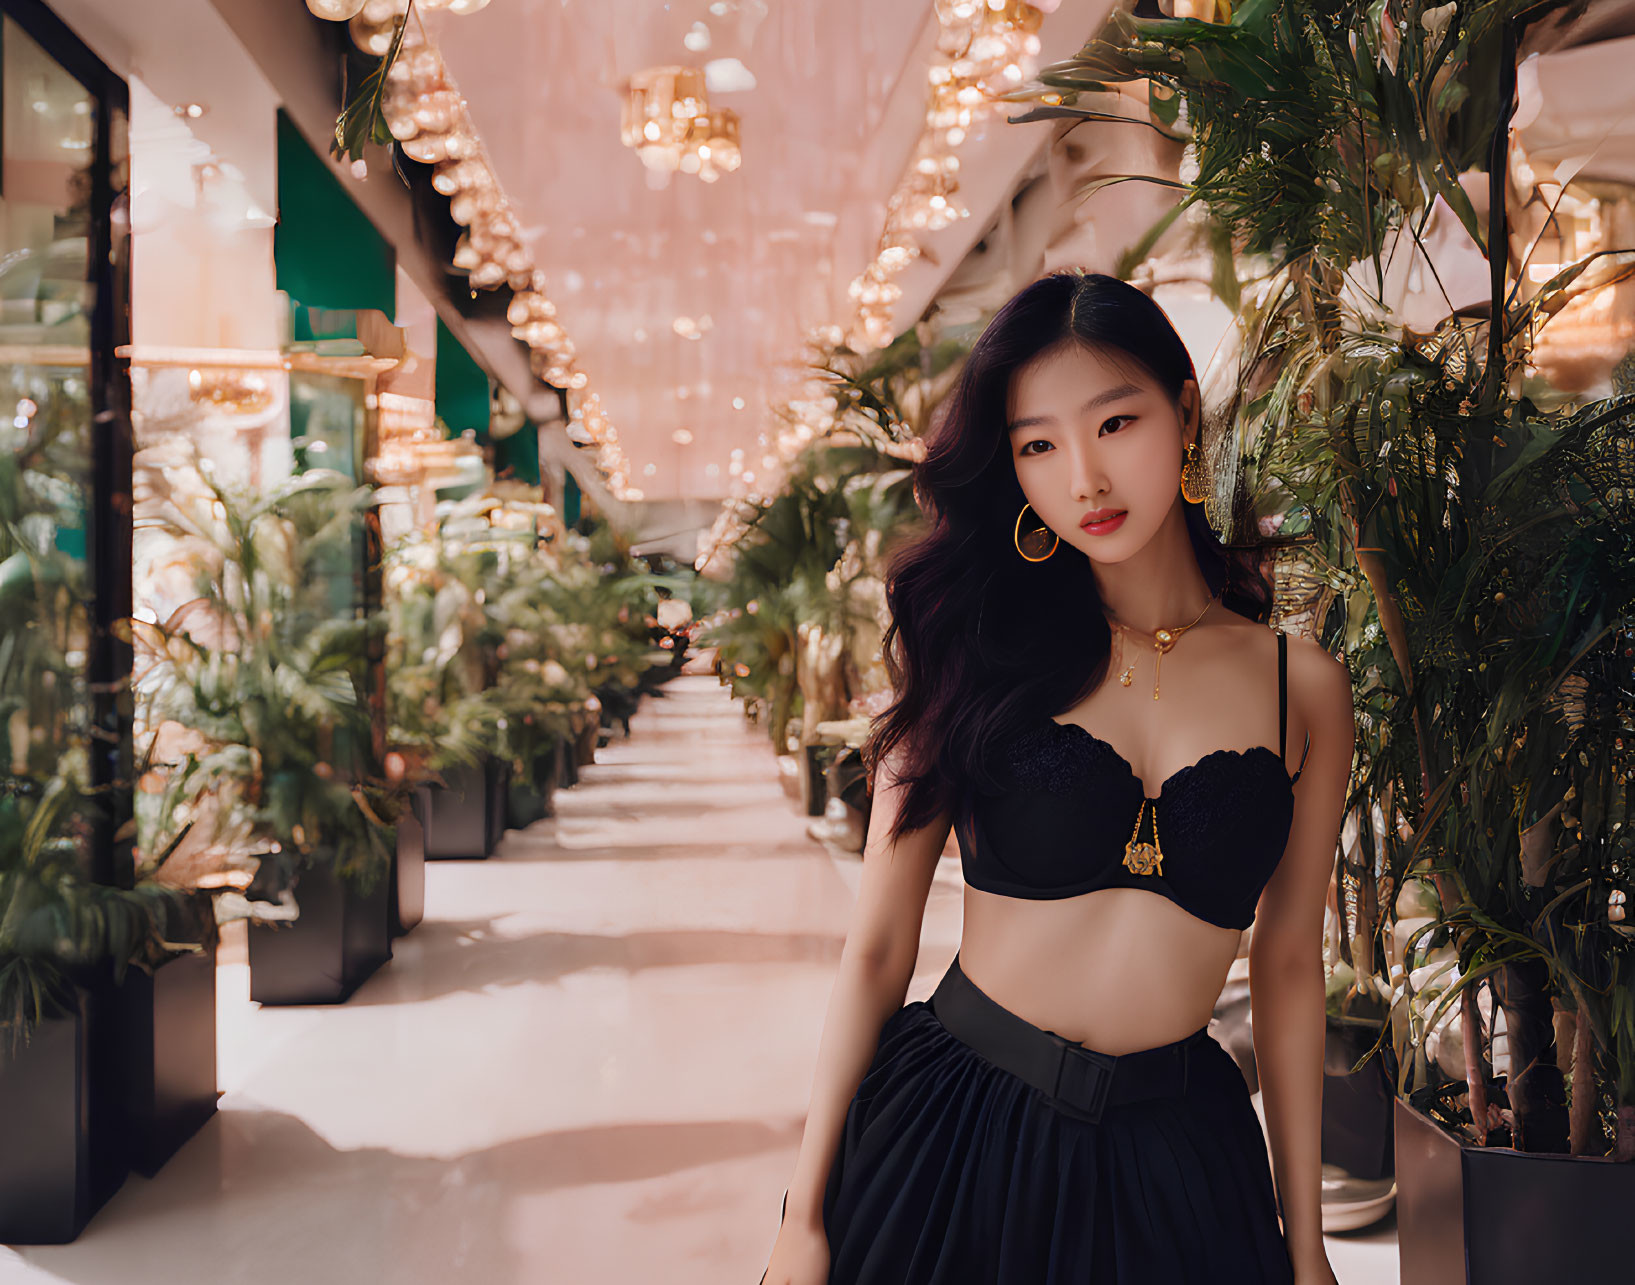 Woman in Black Crop Top and Skirt in Luxurious Interior with Plants and Chandeliers